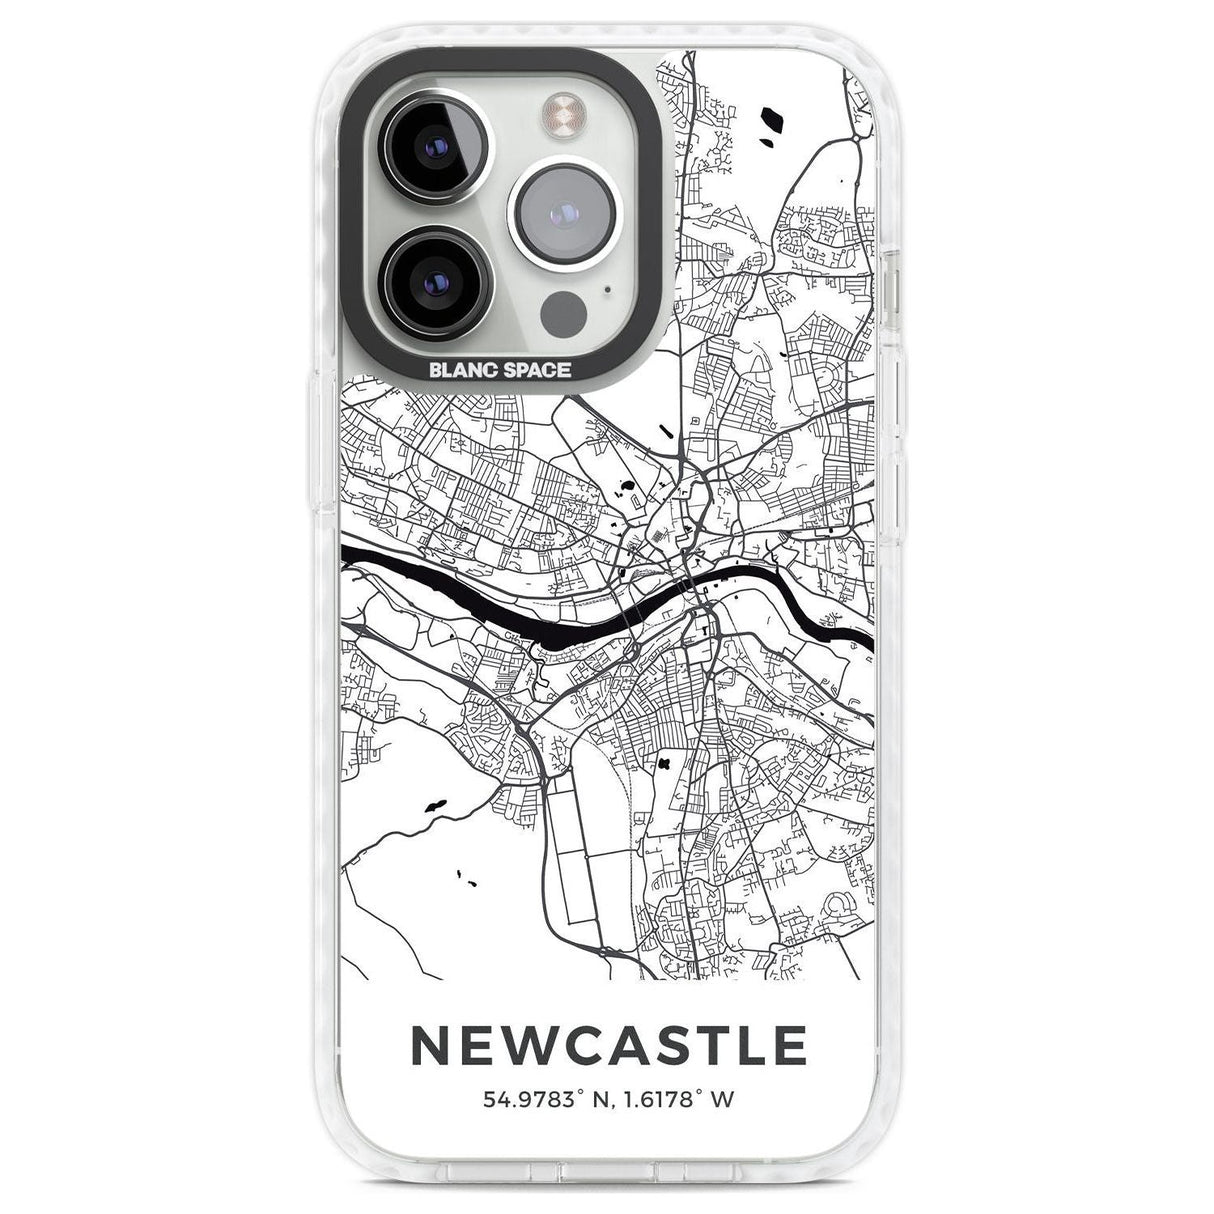 Map of Newcastle, England Phone Case iPhone 13 Pro / Impact Case,iPhone 14 Pro / Impact Case,iPhone 15 Pro Max / Impact Case,iPhone 15 Pro / Impact Case Blanc Space